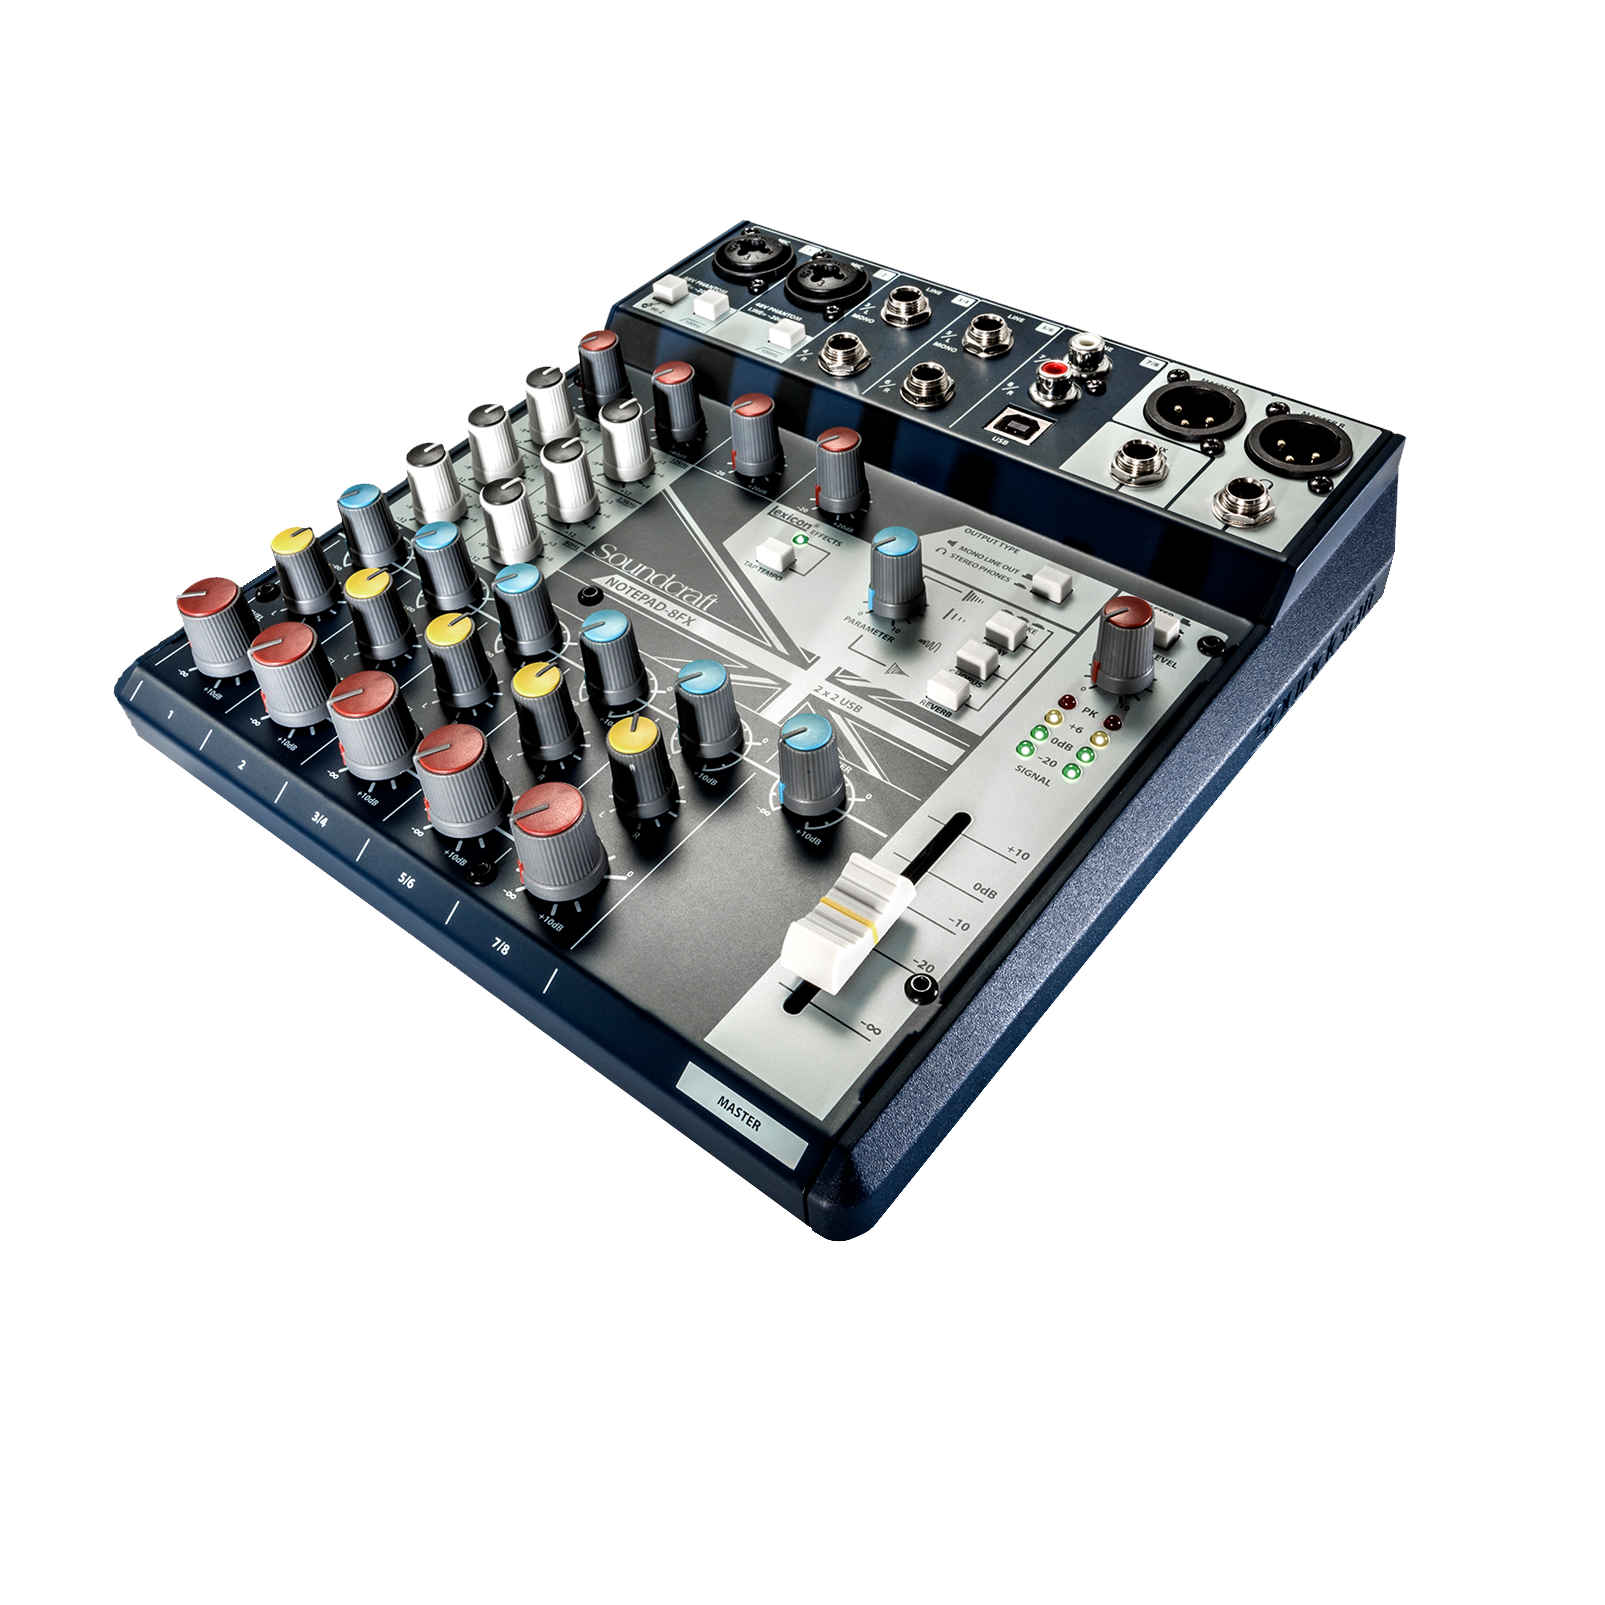 Notepad-8FX - Dark Blue - Small-format analog mixing console with USB I/O and Lexicon effects - Detailshot 2